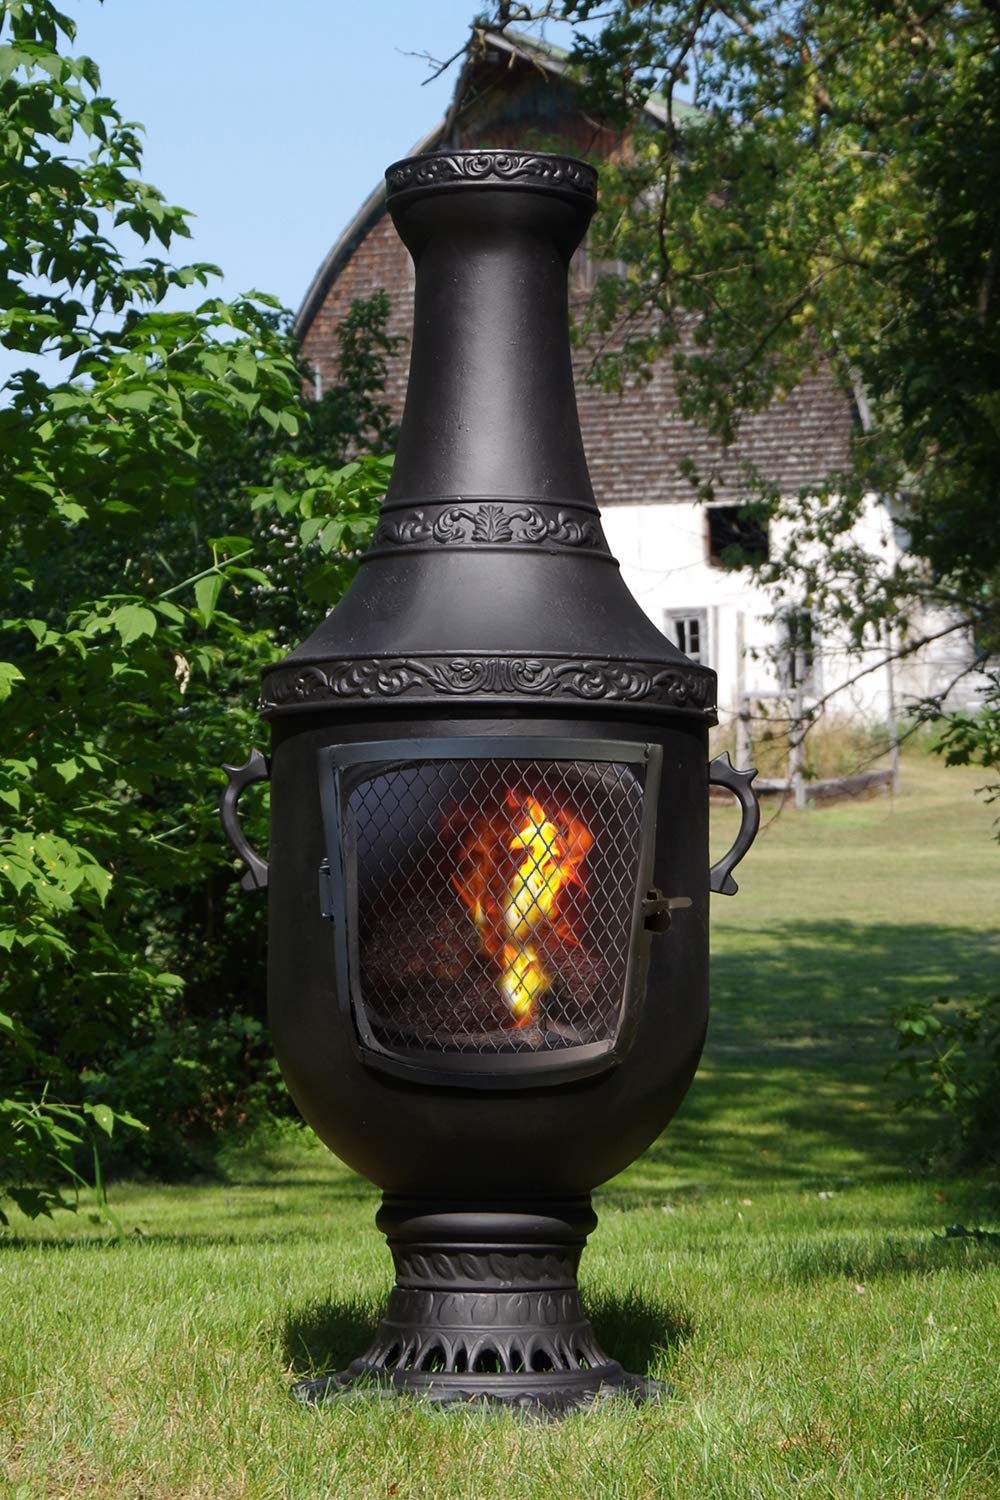 Chiminea Clay Outdoor Fireplace Unique the Venetian Grill & Oven Chiminea In Charcoal Cast Aluminum